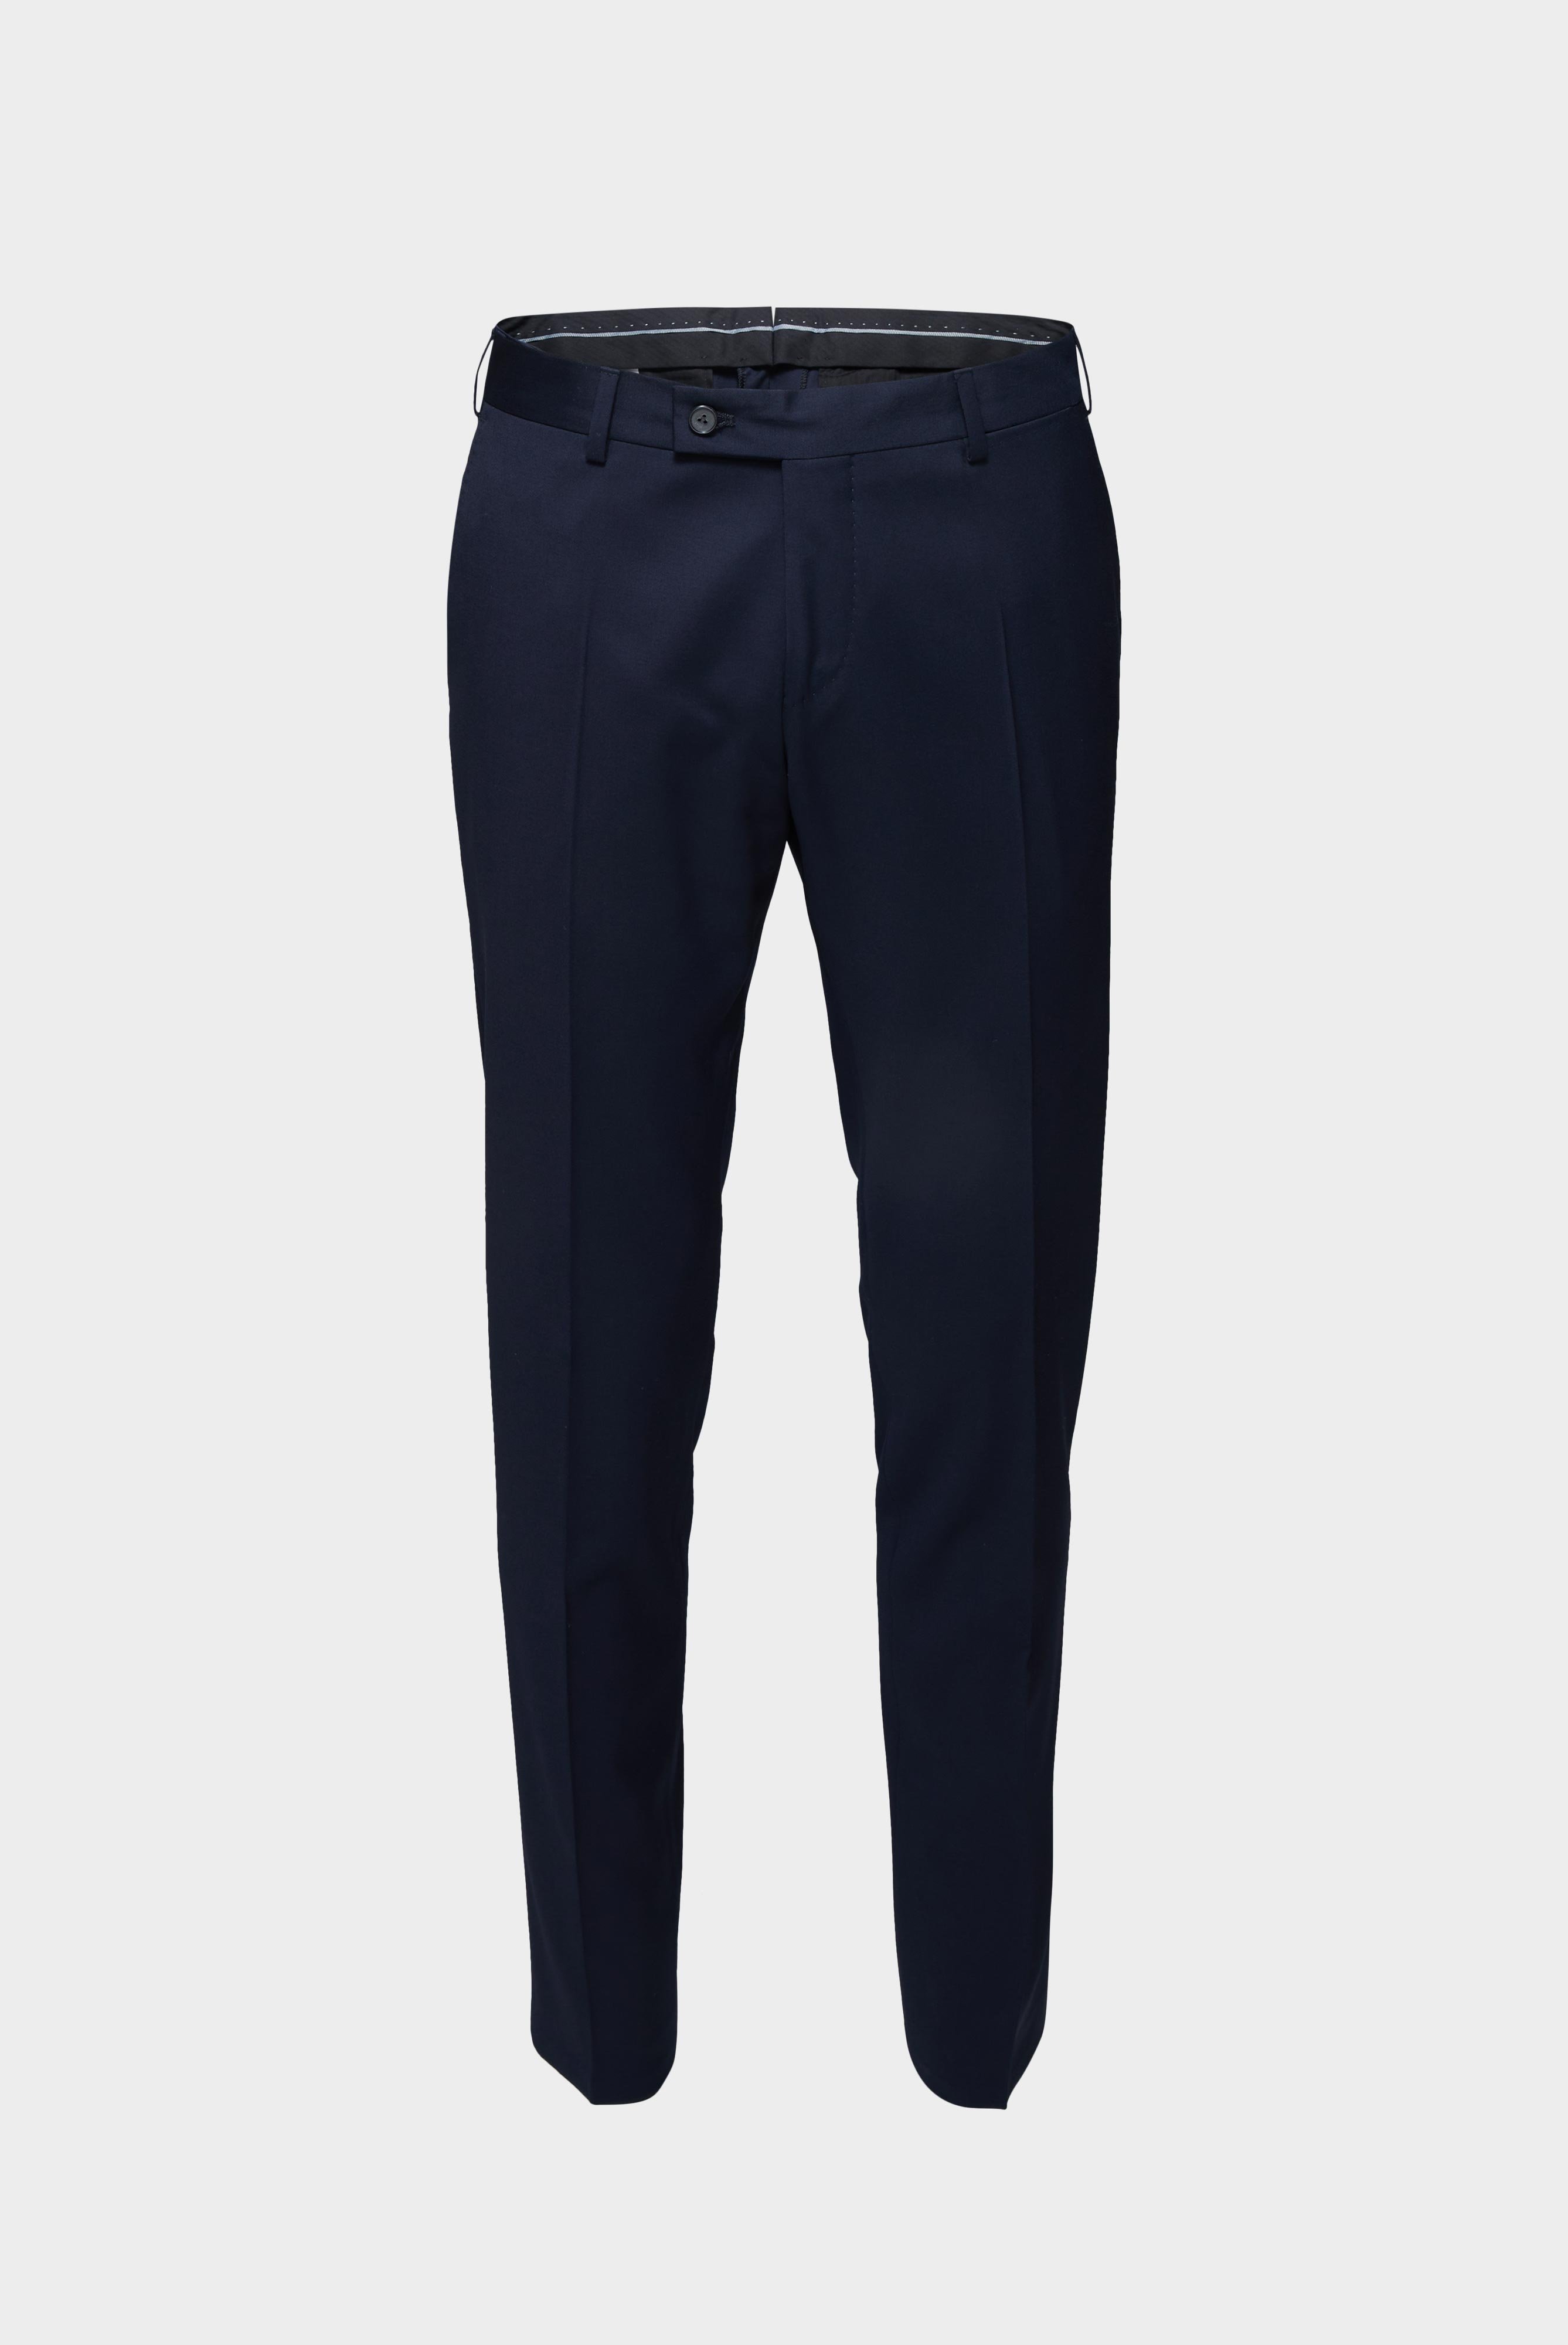 Jeans & Trousers+Wool Trousers Slim Fit+20.7880.16.H01010.780.31